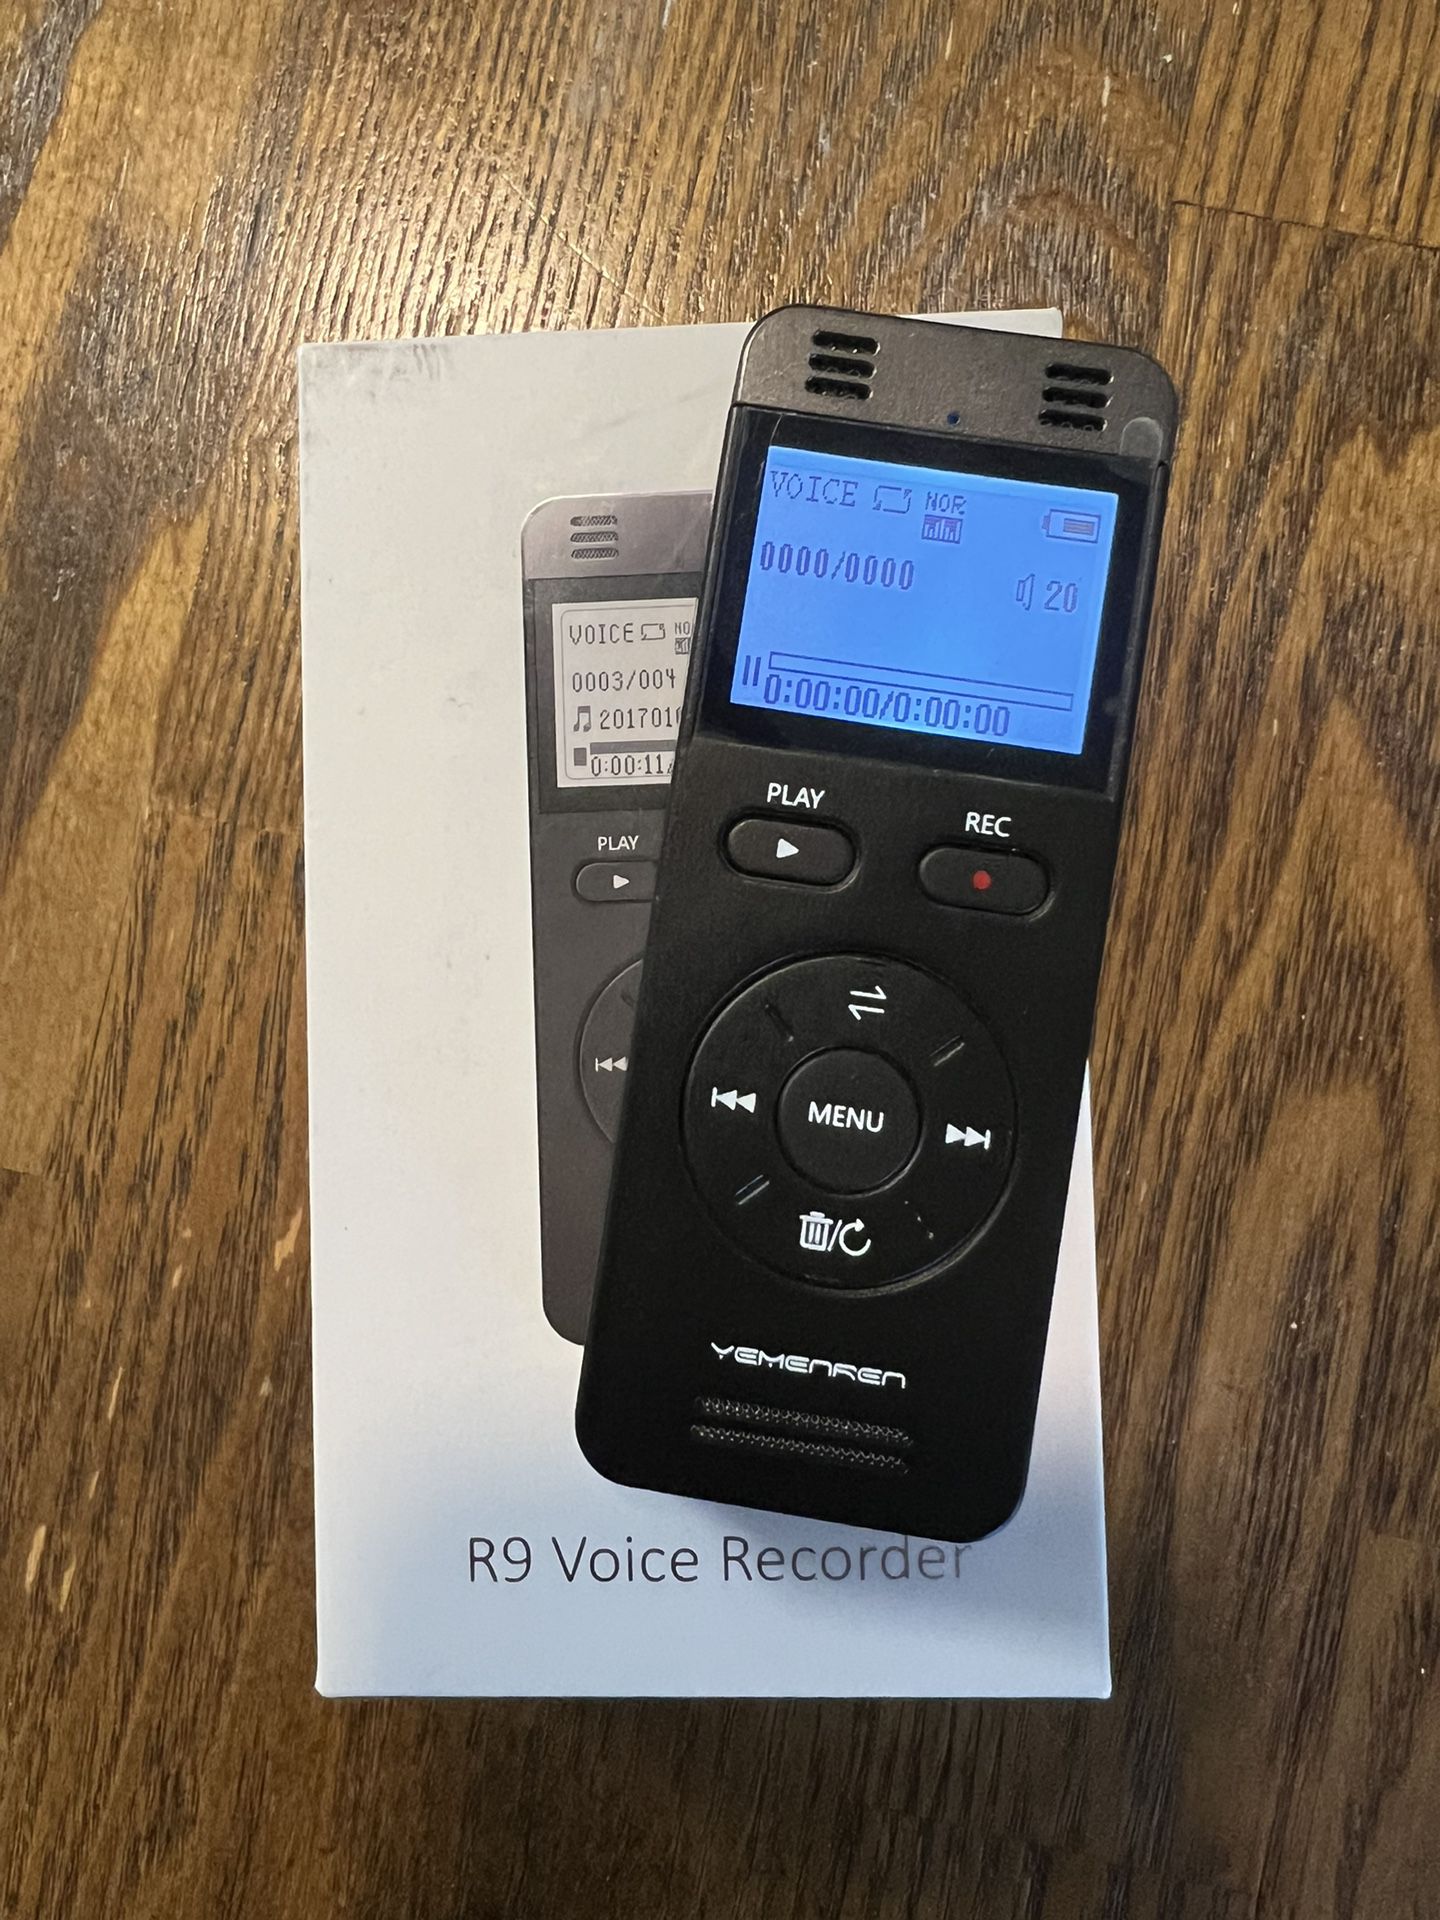 Voice Recorder 8GB With Playback Speakers Micro USB Port And Headphone Jack